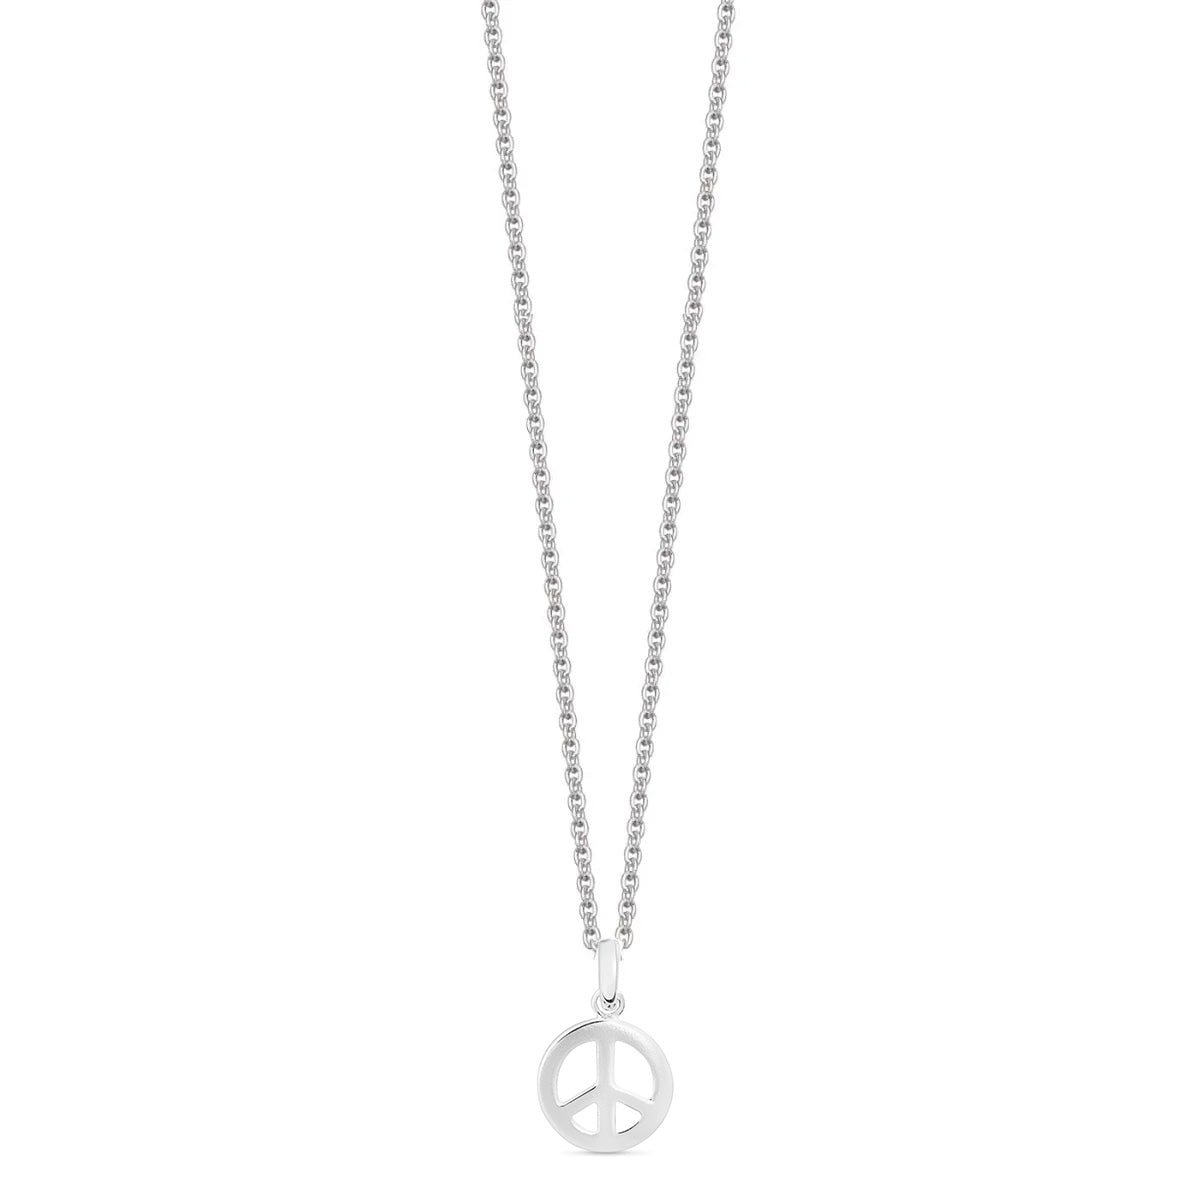 Mini Sterling Silver Peace Necklace | Hersey & Son Silversmiths